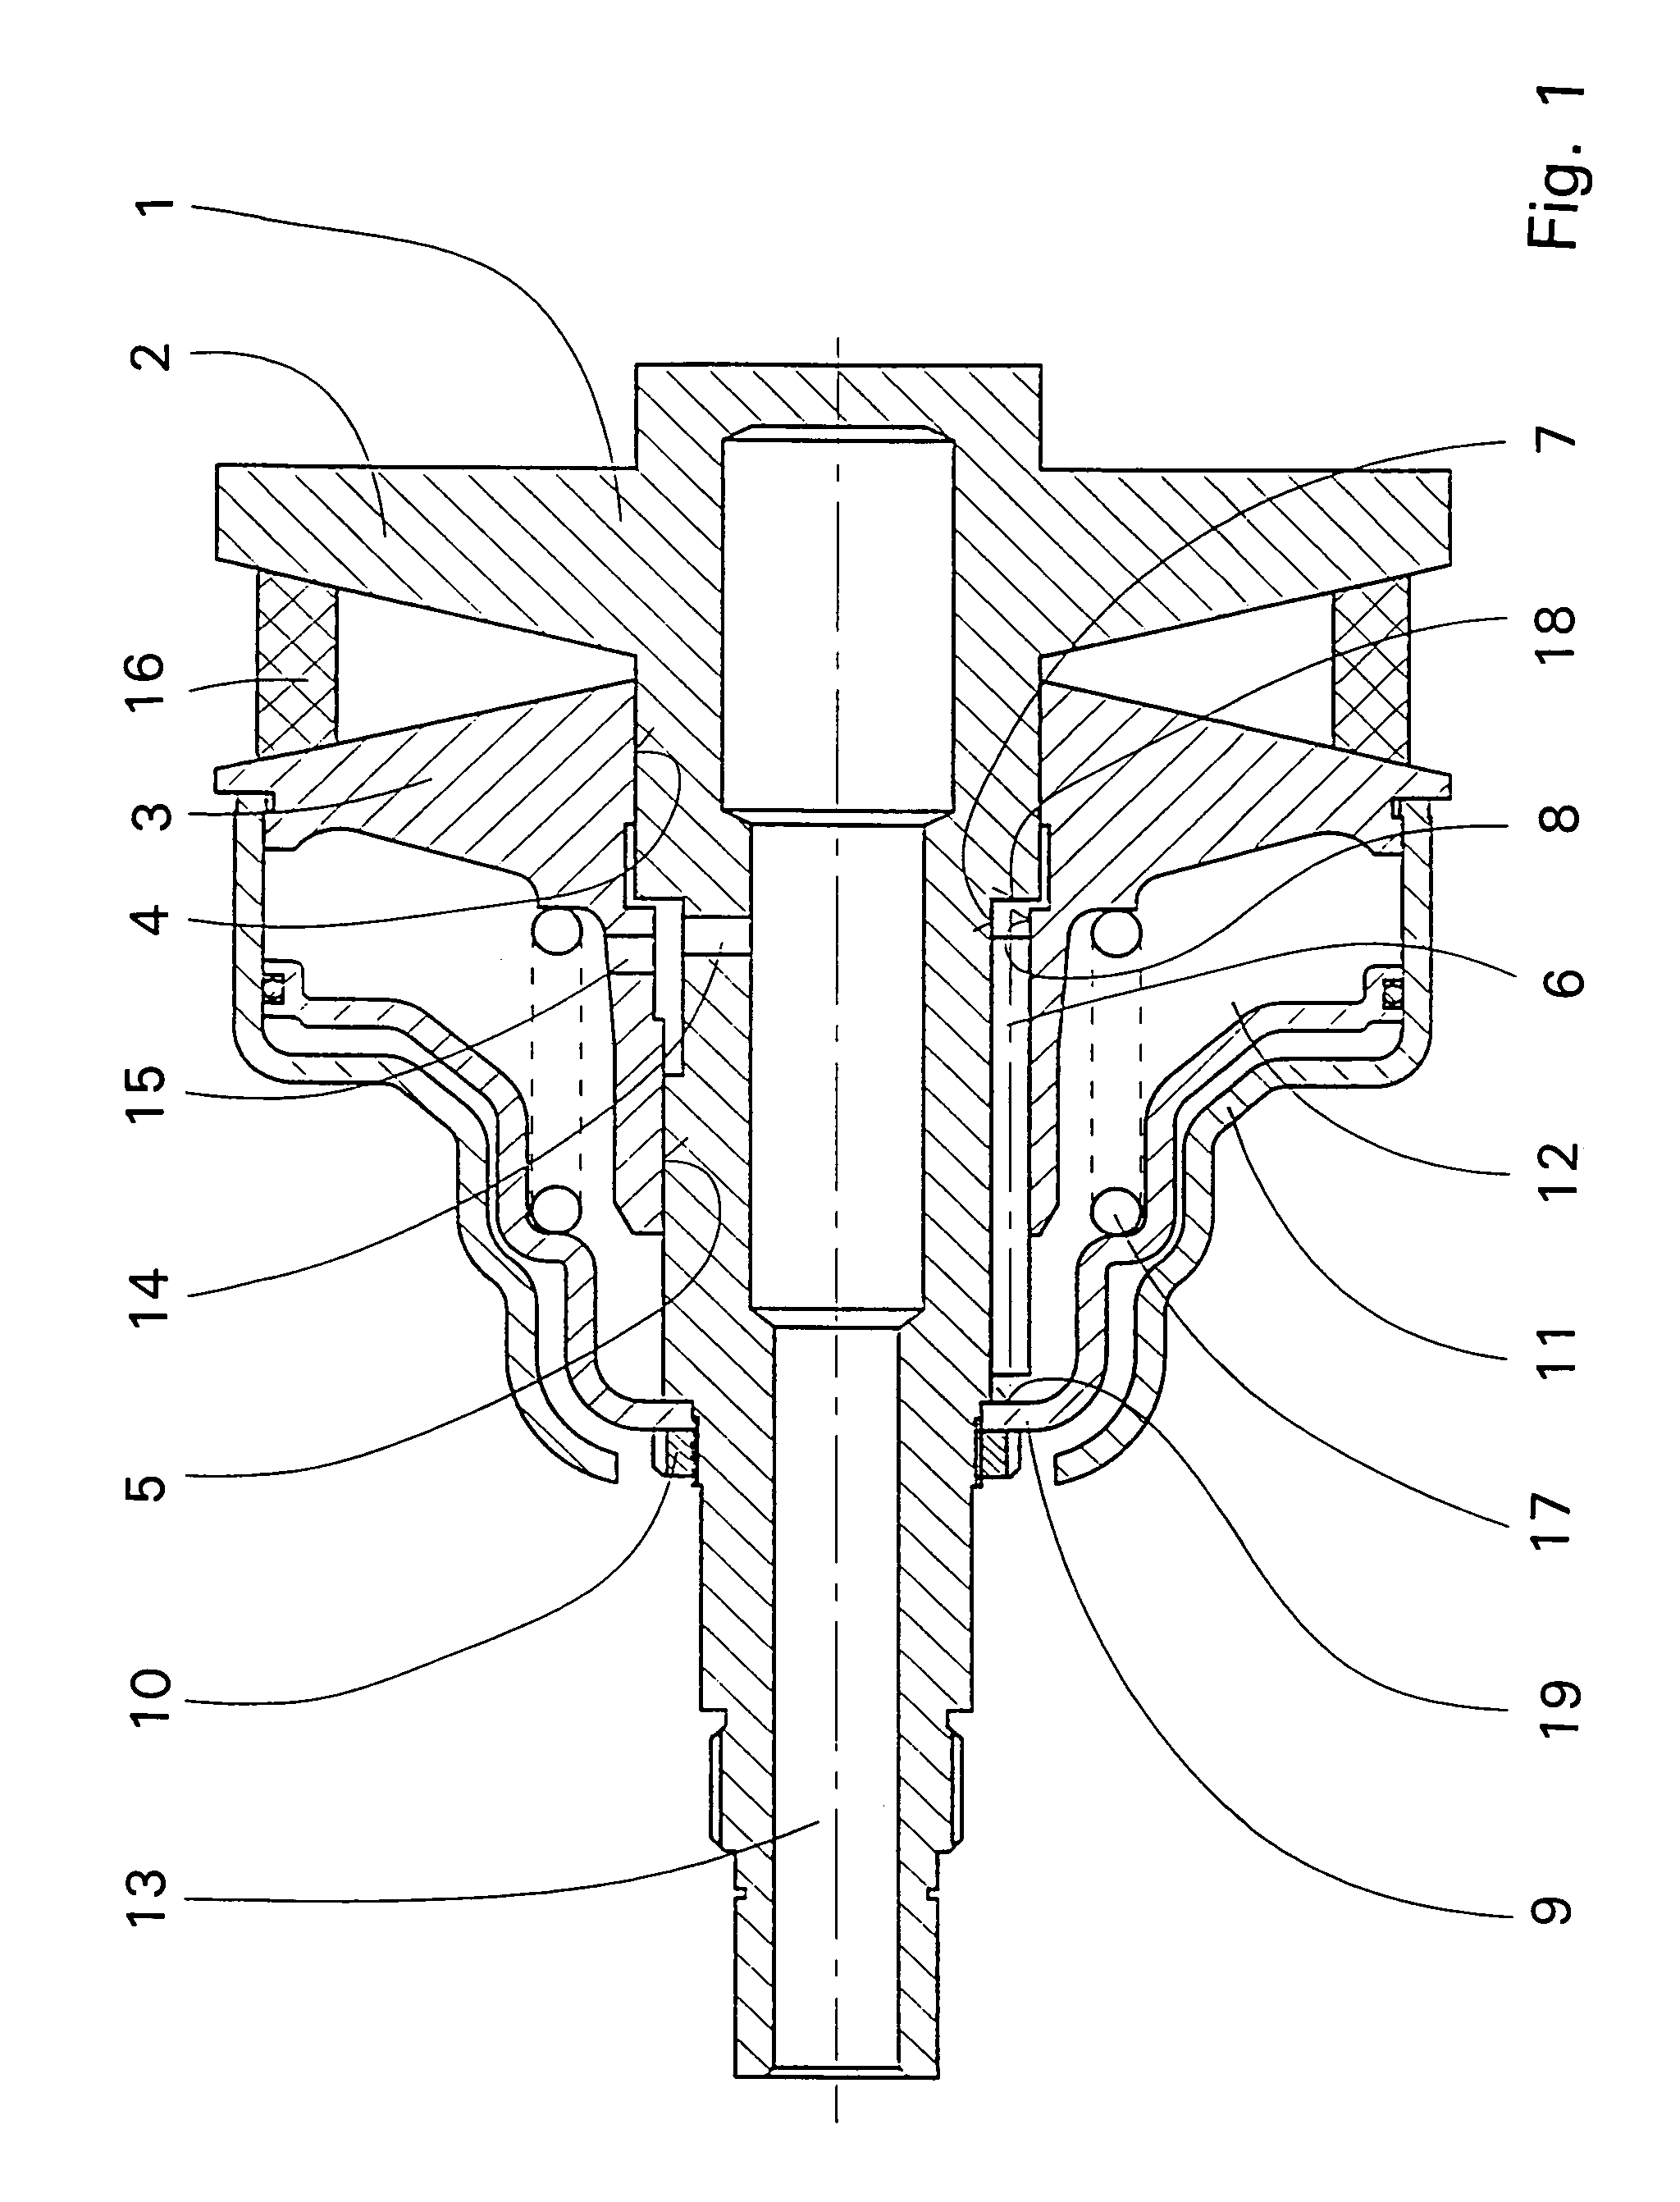 Device for guiding a moveable conical pulley disc of a CVT variator